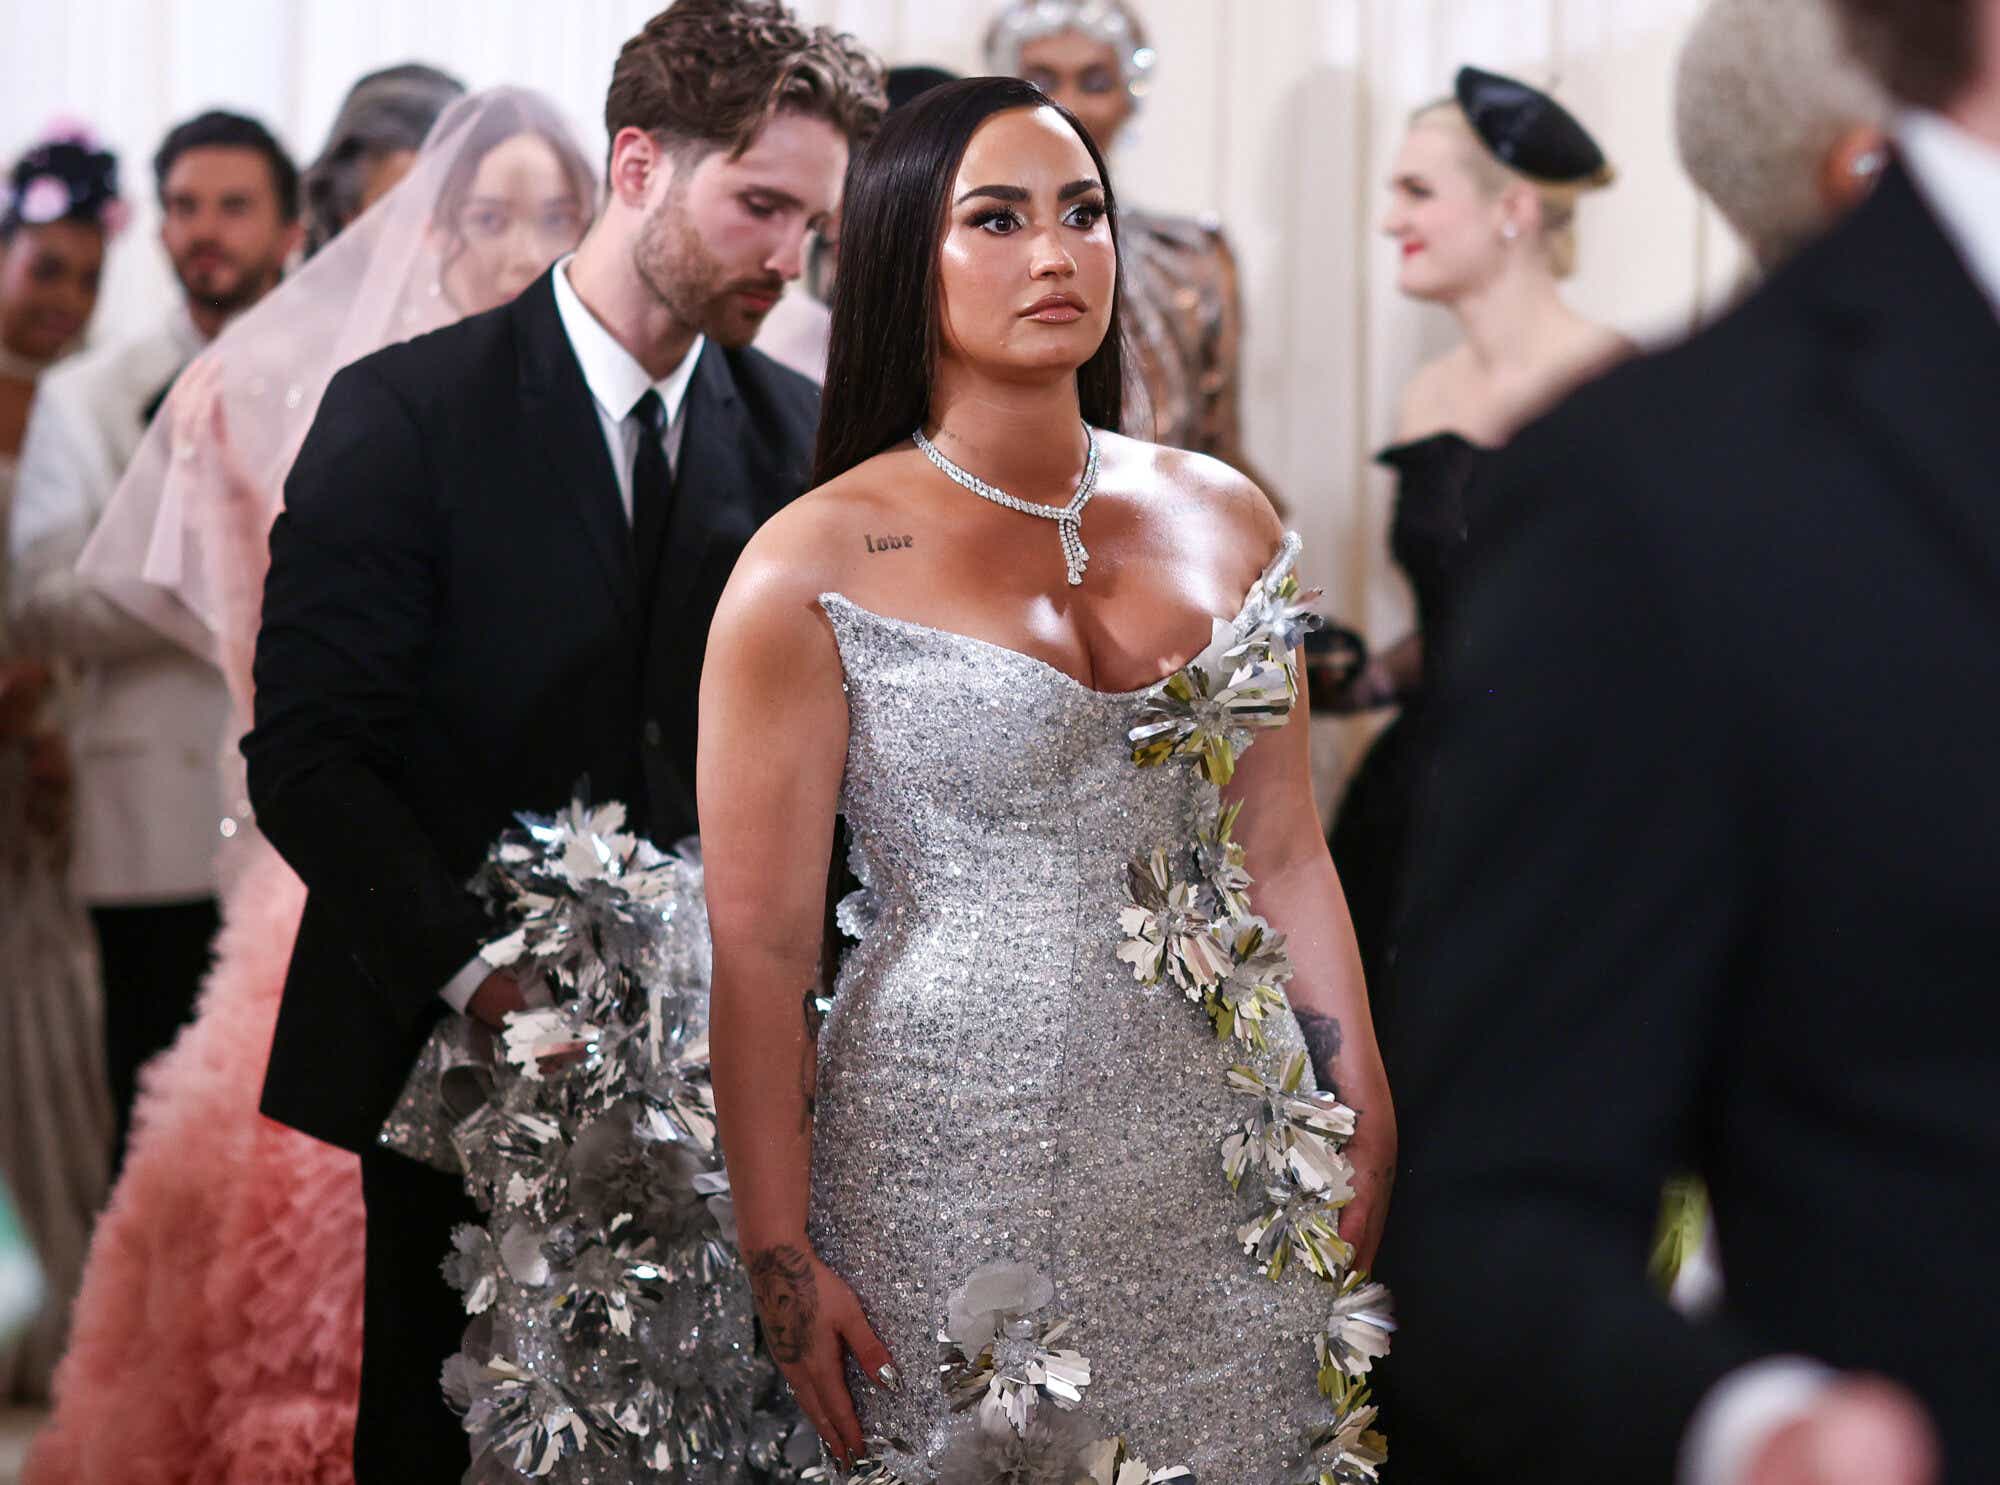 Demi Lovato wears a strapless silver dress with a structured neckline and delicate metallic flowers trailing down one side, merging into a flowery train